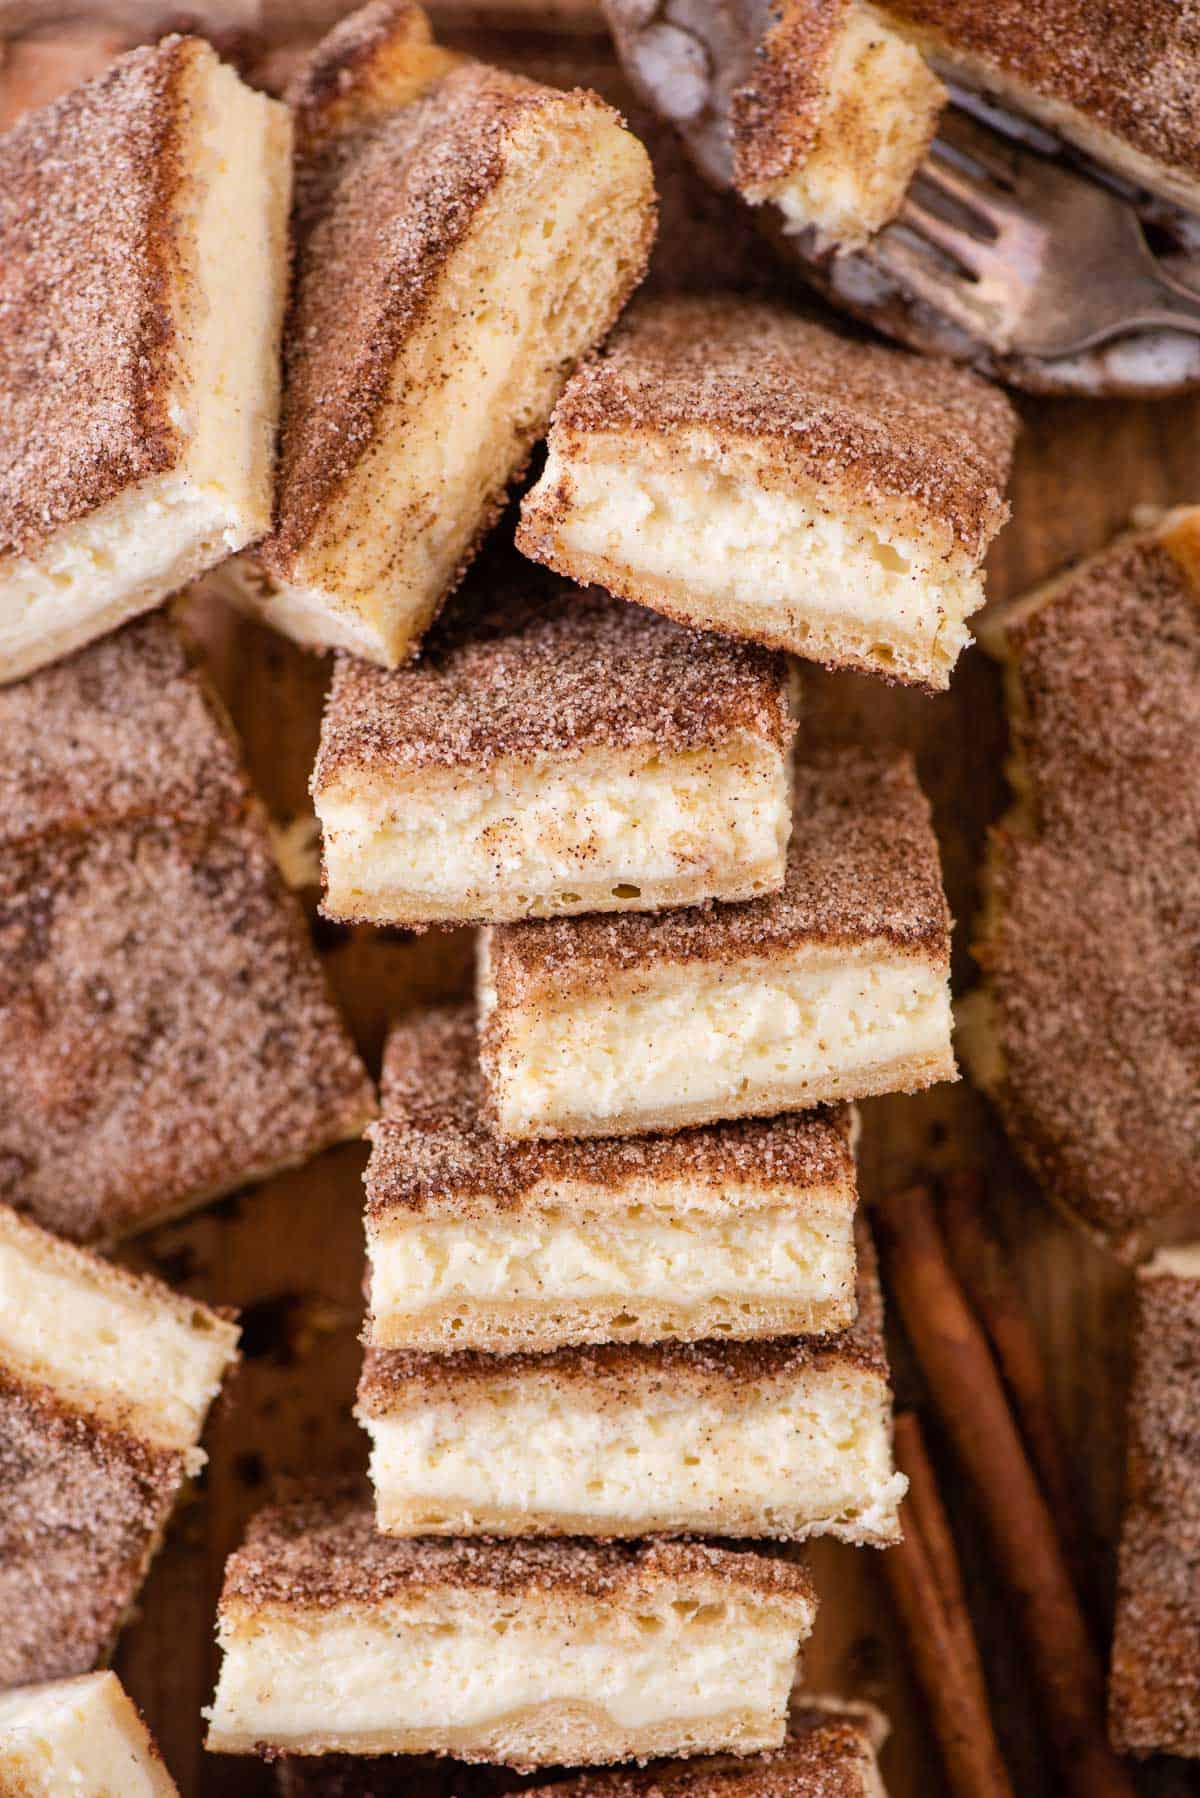 Overhead view of churro cheesecake bars on their side